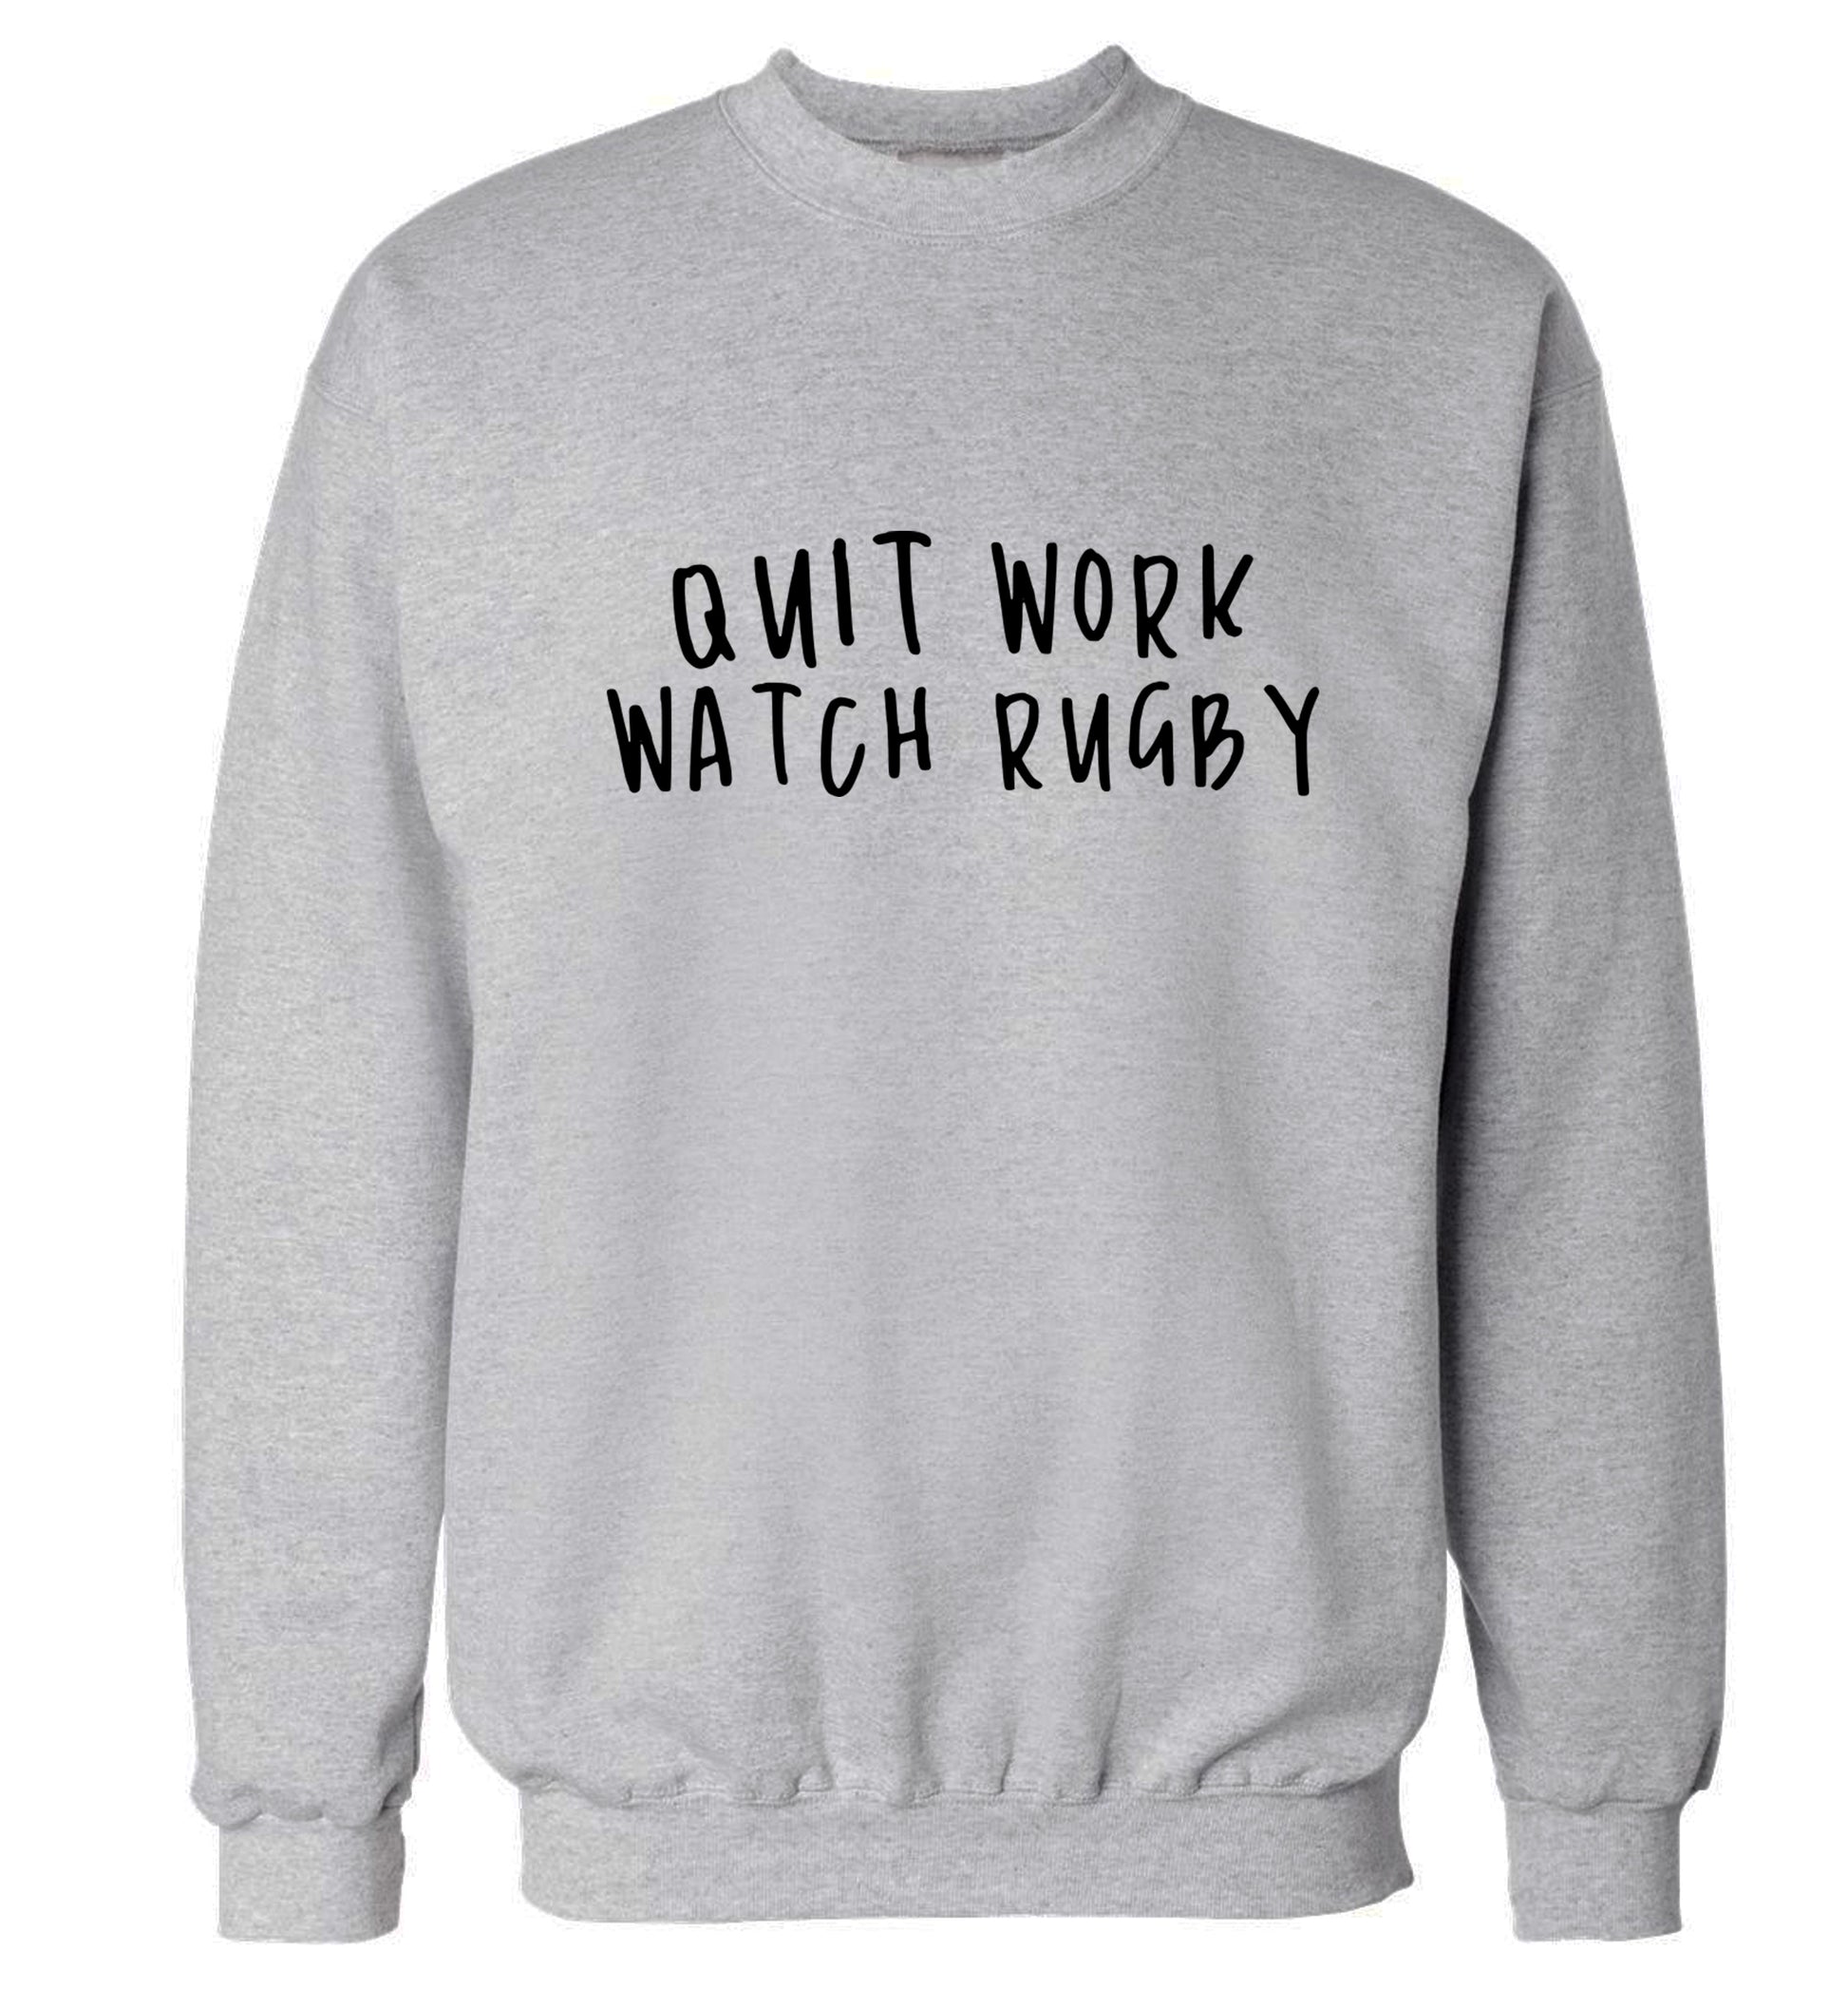 Quit work watch rugby Adult's unisex grey Sweater 2XL